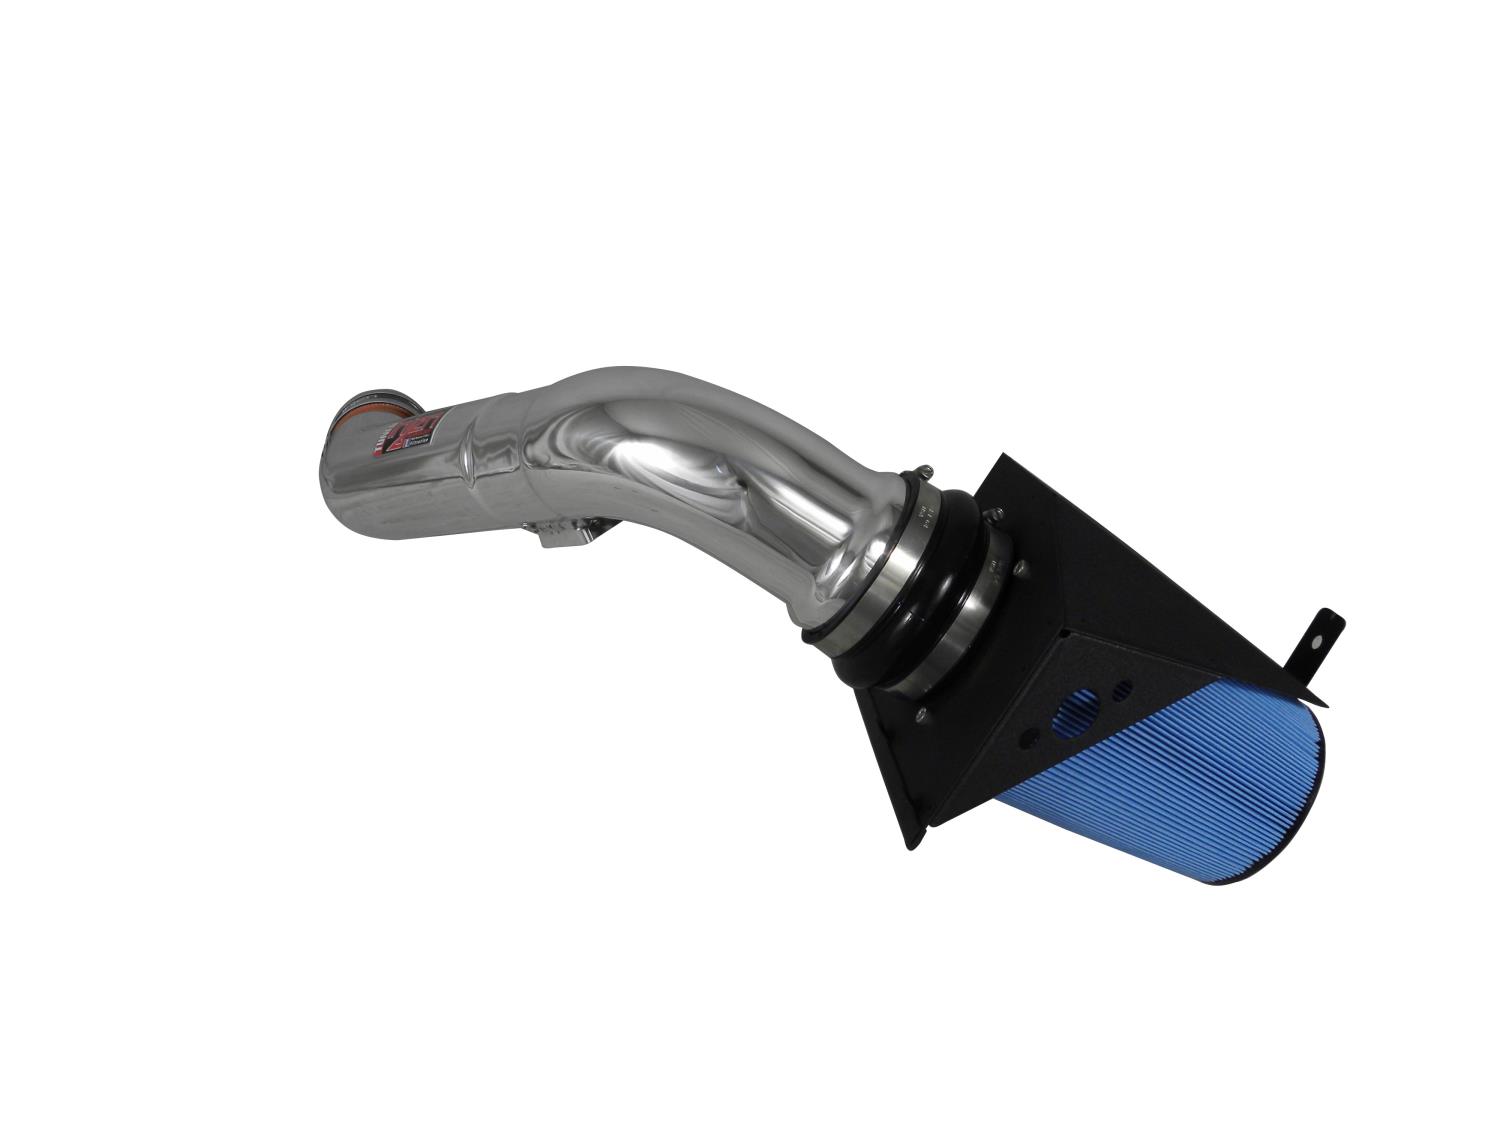 Polished PF Cold Air Intake System, 2009-2010 Ford F-150 V8-4.6L 2 Valve.